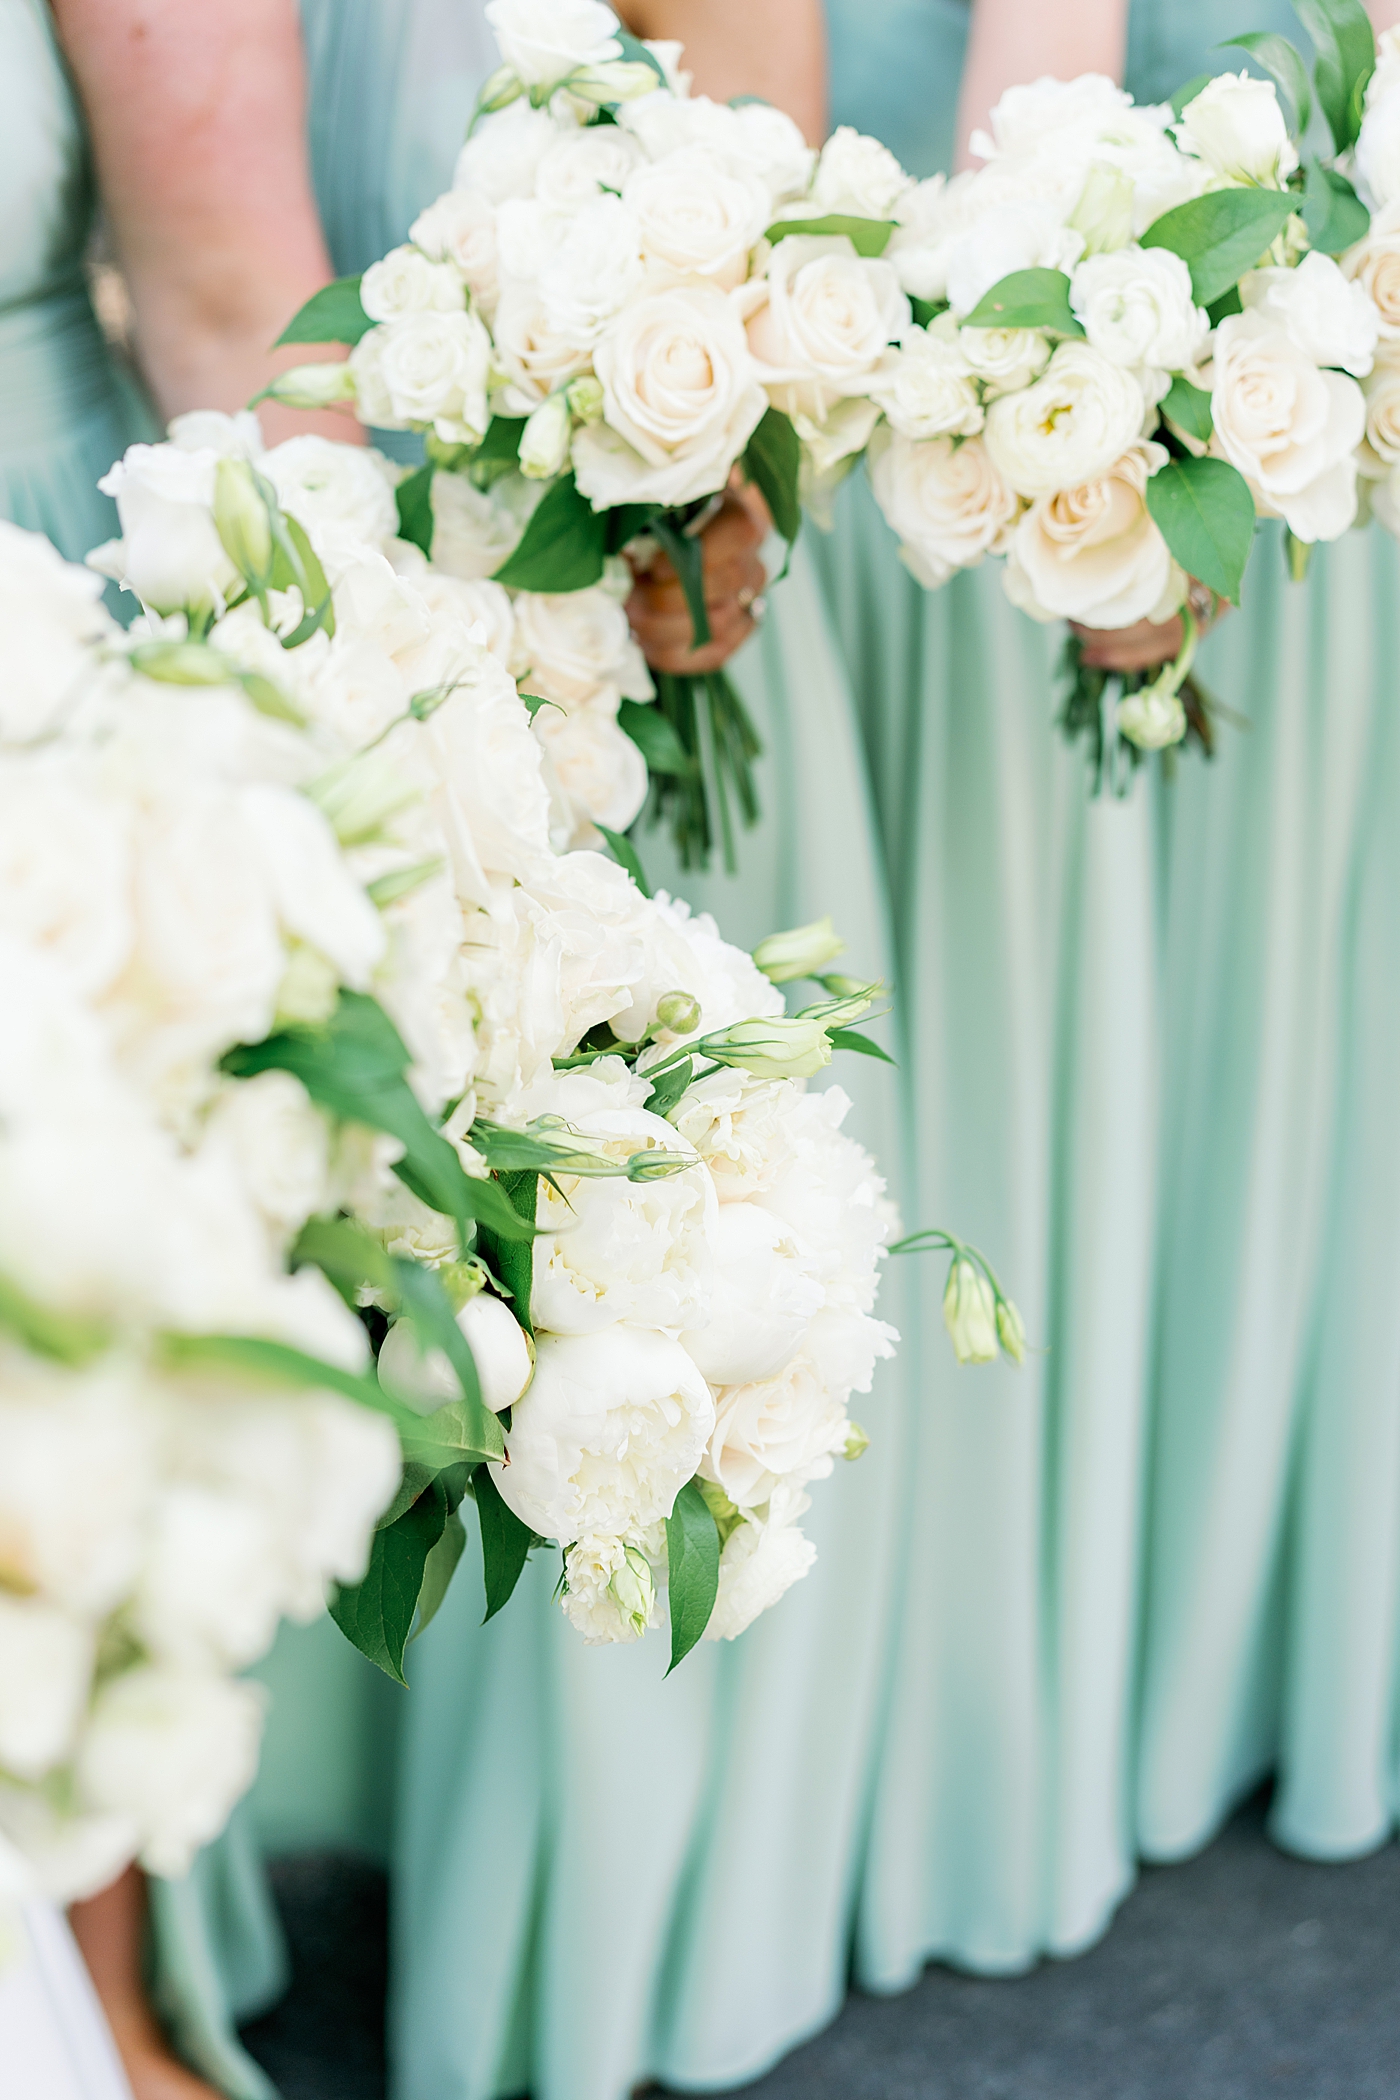 Bridesmaids bouquets with green dresses in the background | Image by Annie Laura Photo